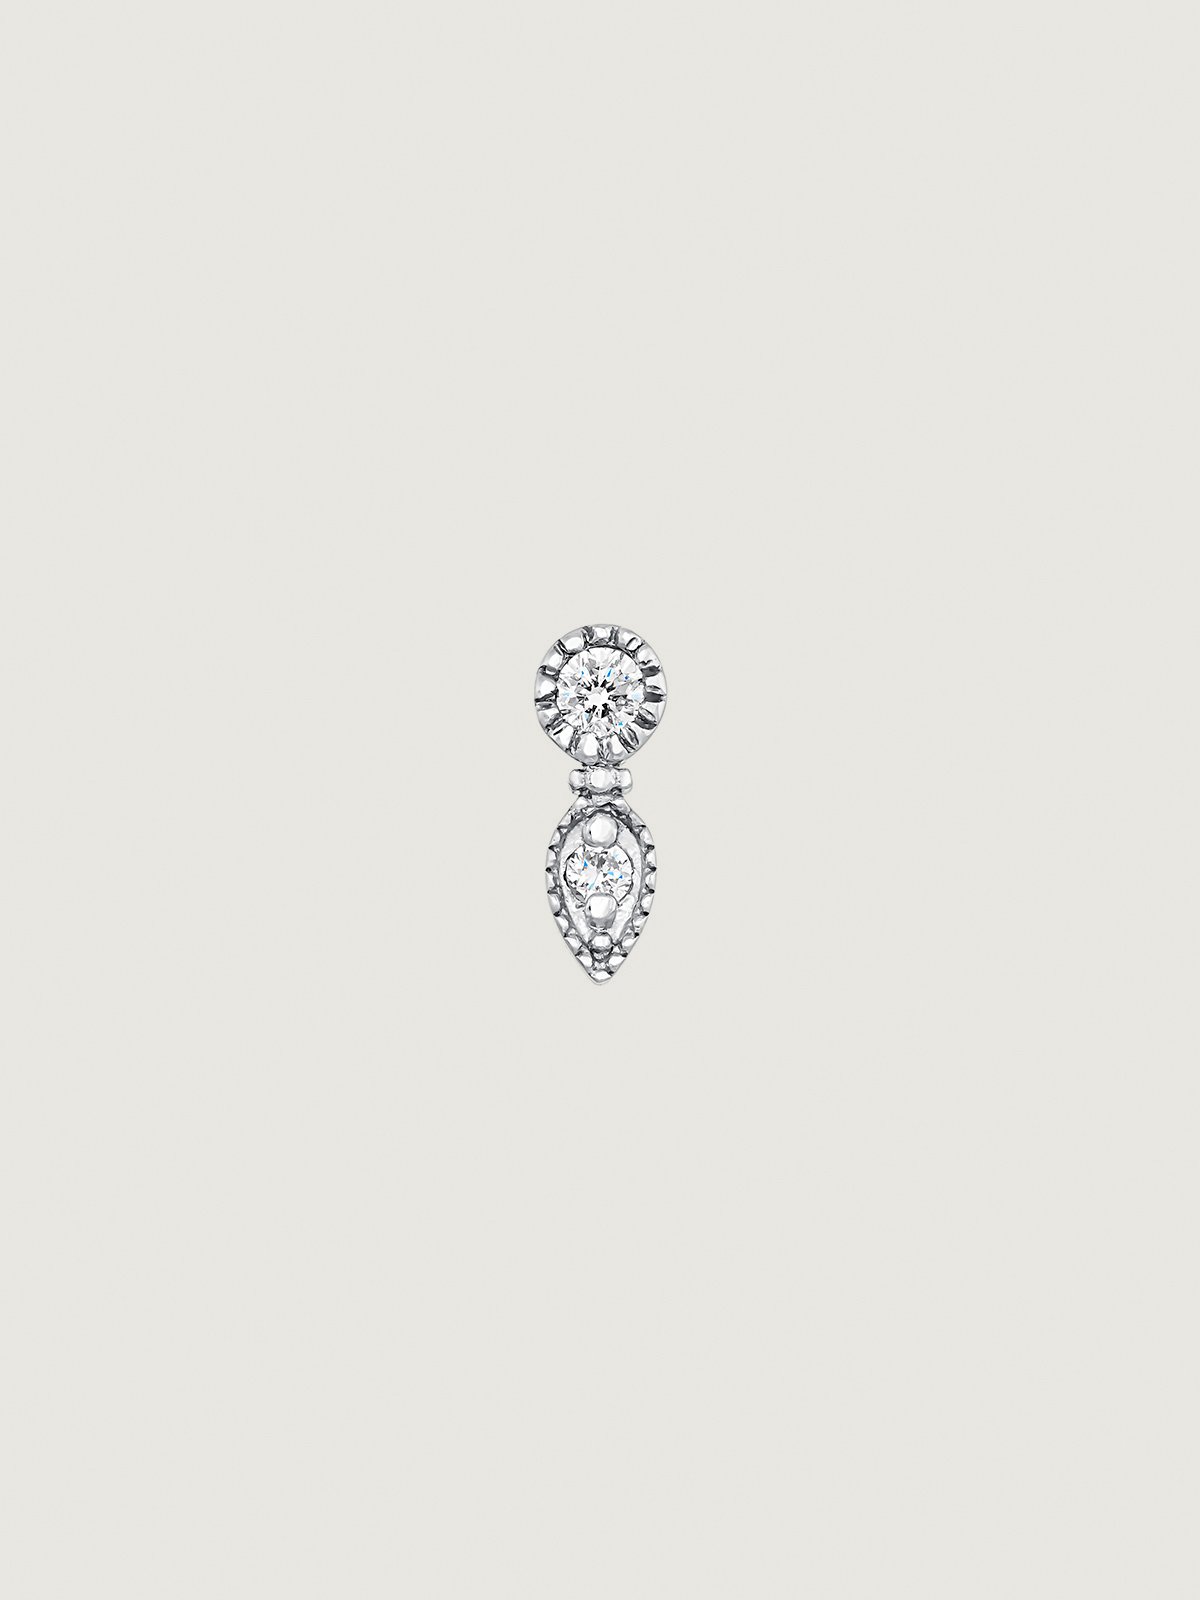 9K white gold drop-shaped earring with a white diamond.